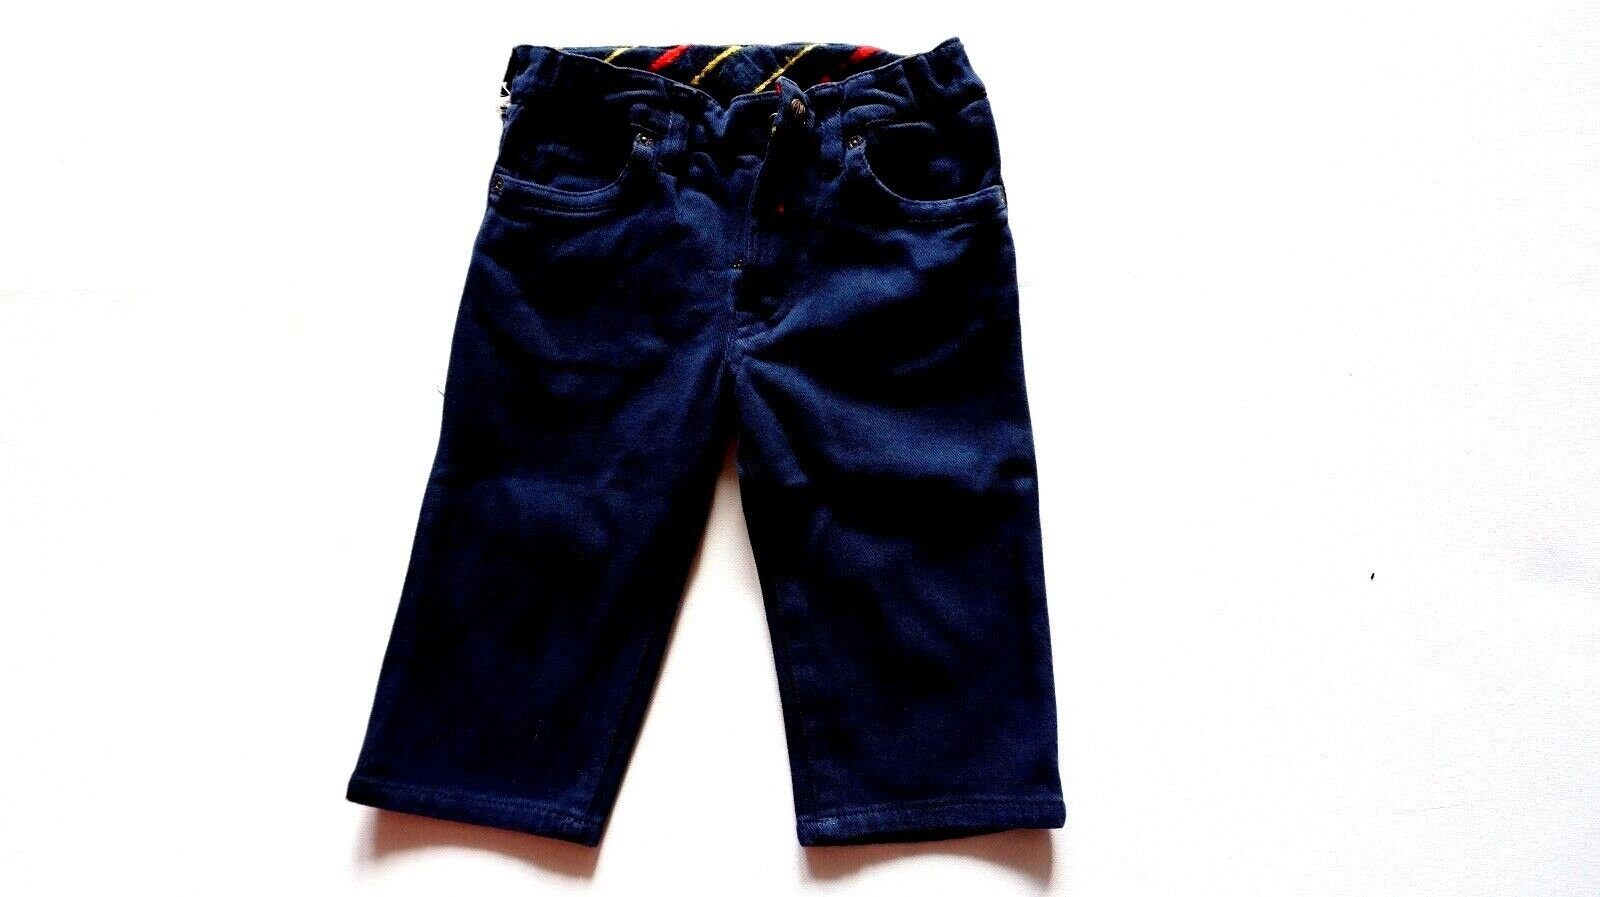 REPLAY & SONS 5-Pocket-Jeans Replay Jeans Jungen Kinder Kinder Hose Jeans Jeans, Replay